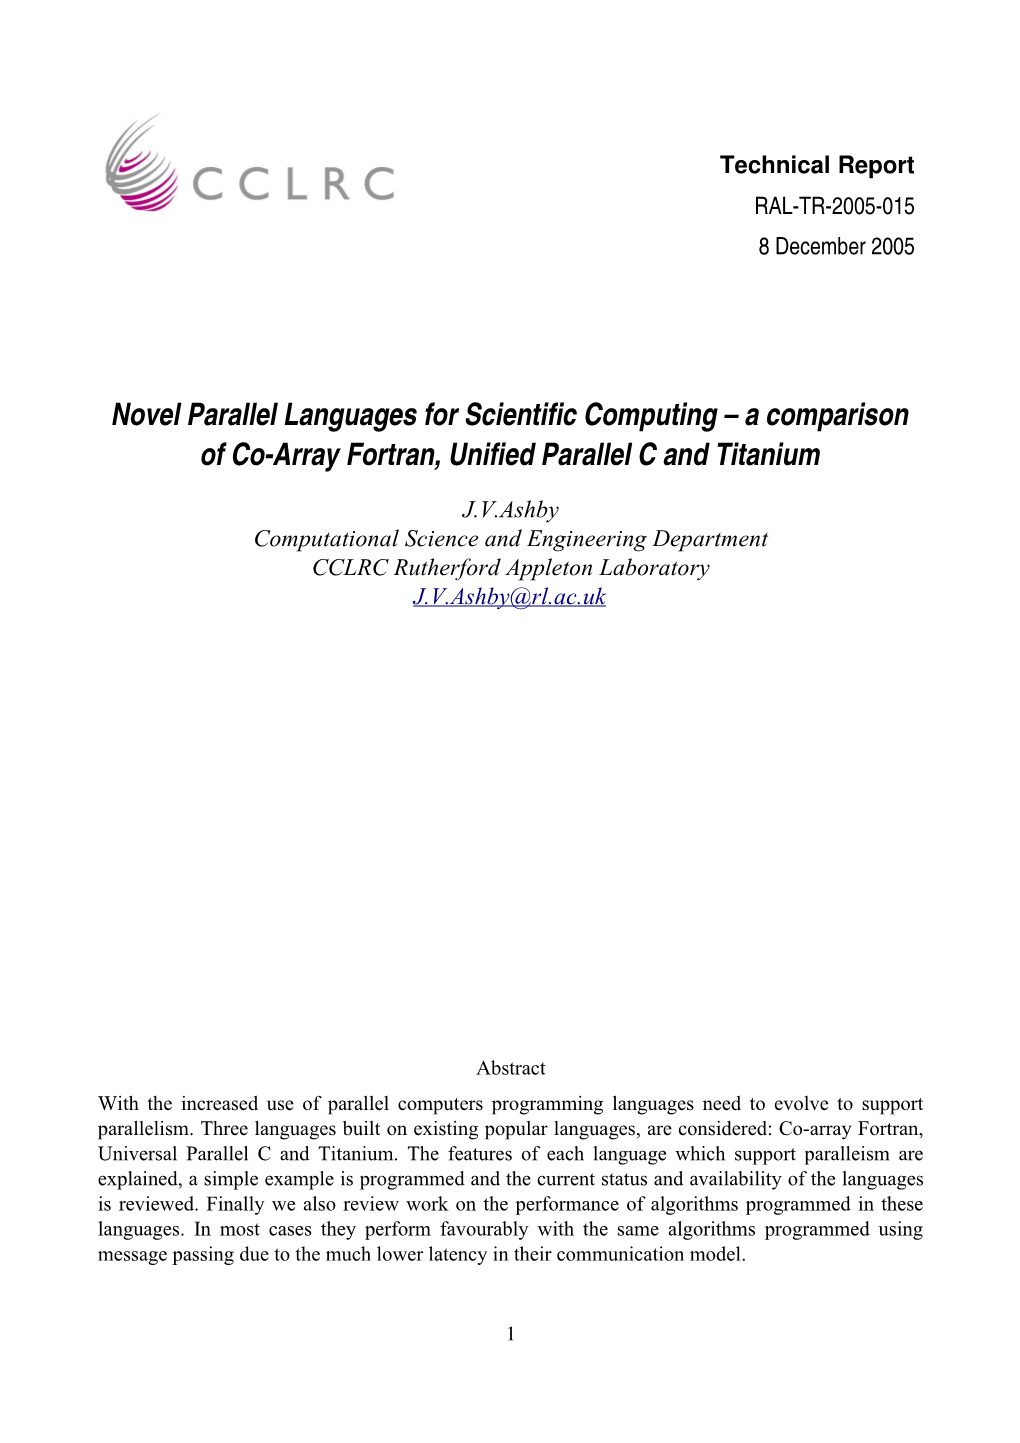 A Comparison of Coarray Fortran, Unified Parallel C and T